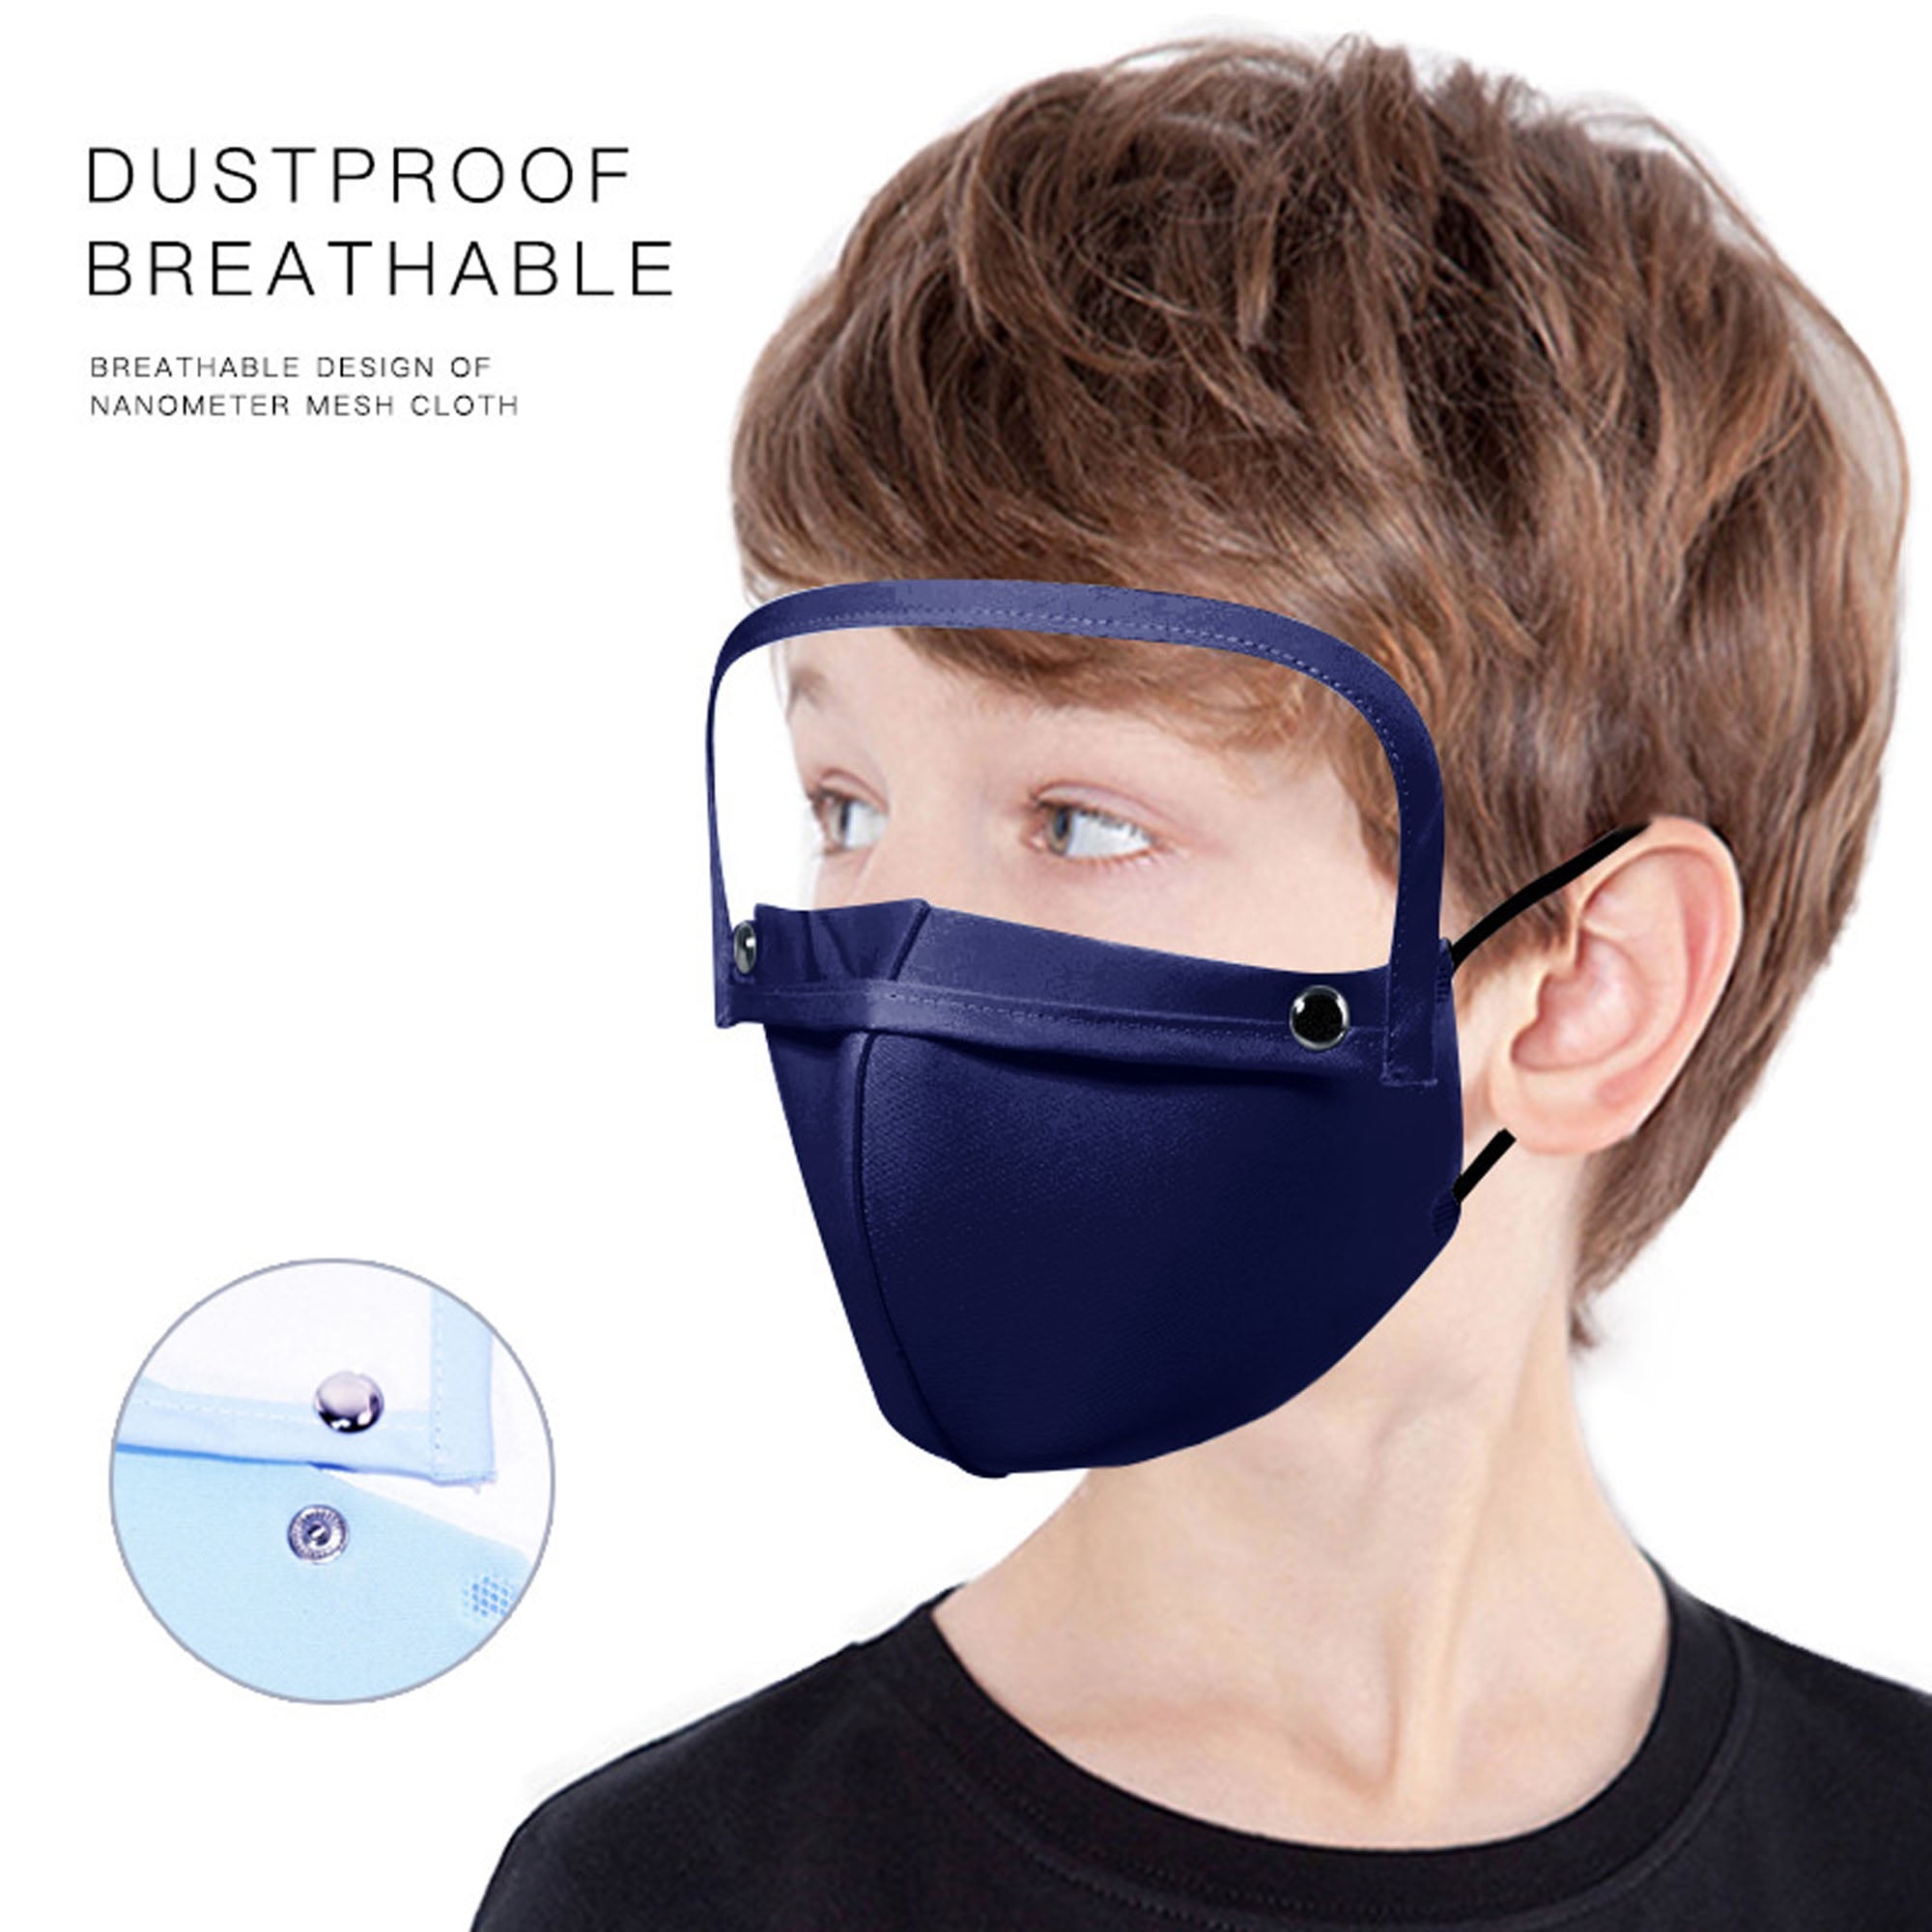 Details about   Adult Face Mask Protective Guard Visor Eye Shield Cover Mouth Filter Reusable 